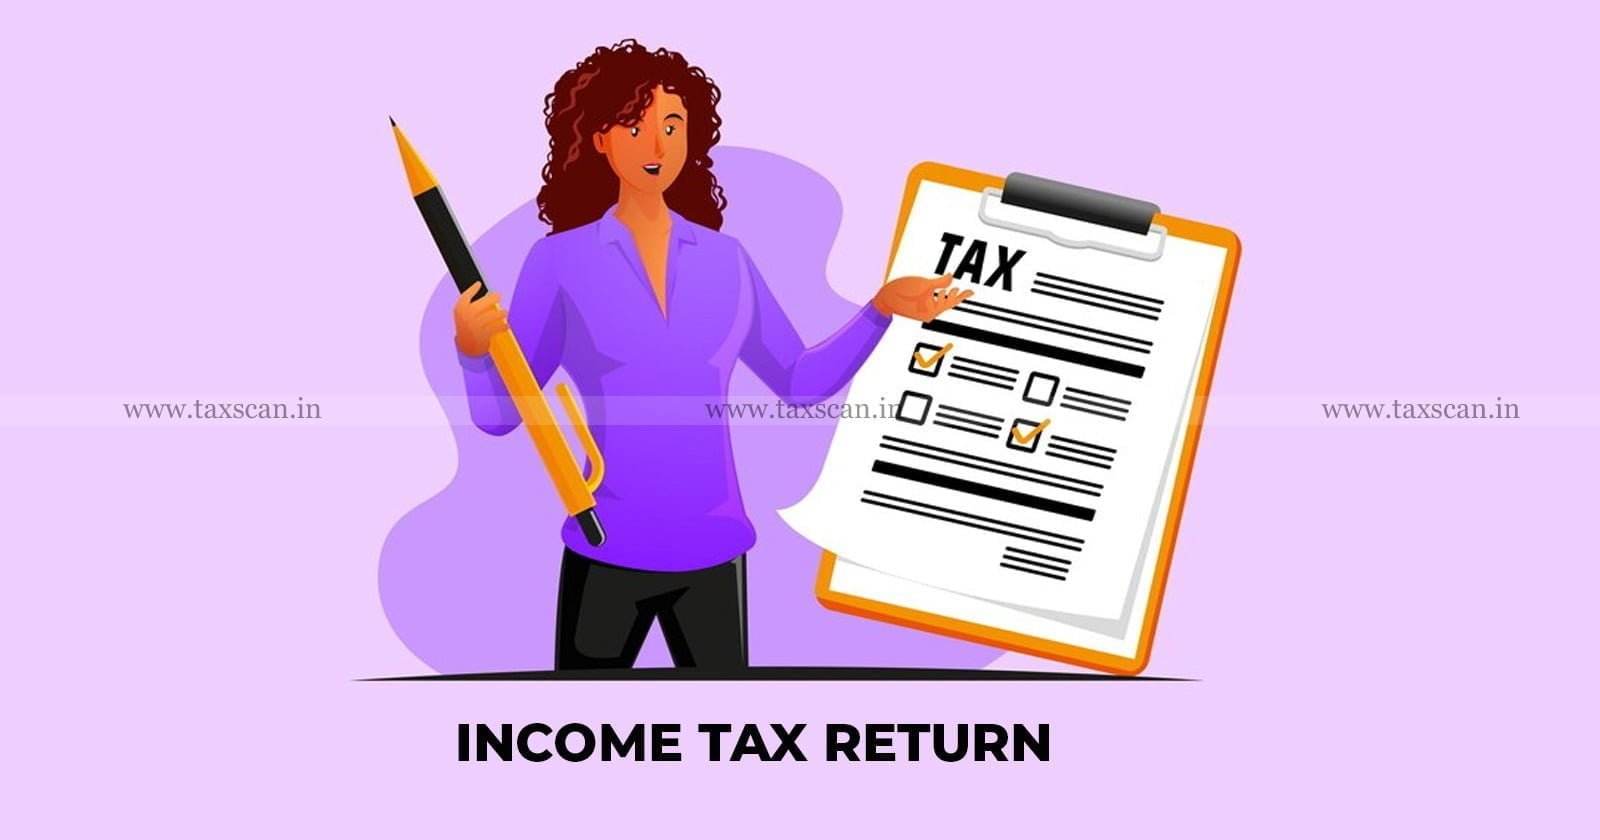 Telangana Highcourt - amalgamated company - file Income Tax Returns - Income Tax Returns - Condonation of Delay by competent authority - Condonation of Delay - taxcan